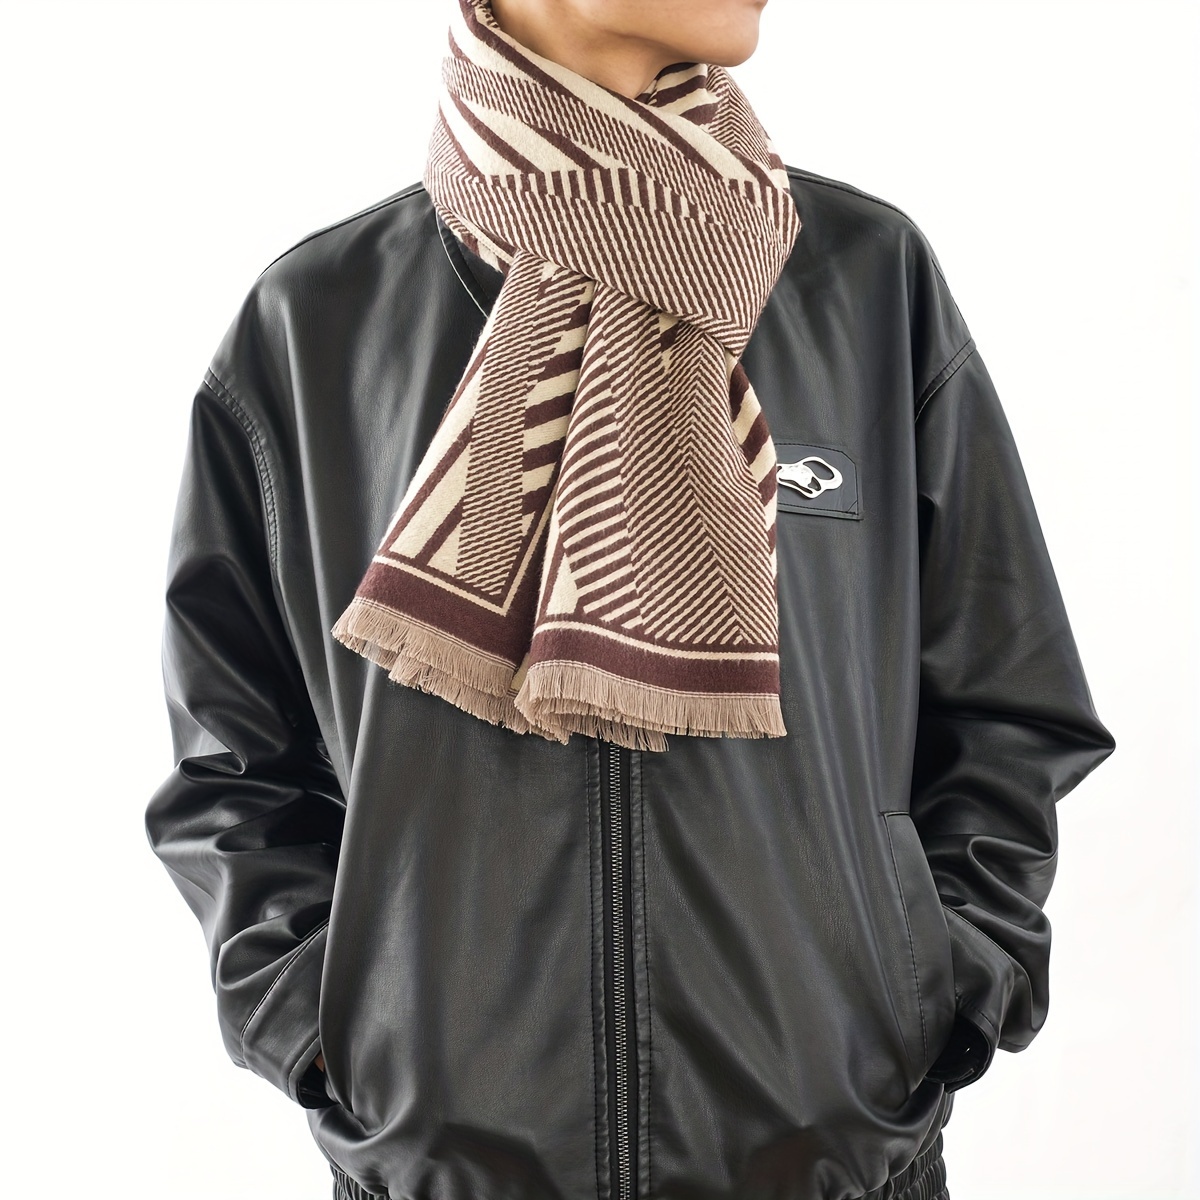 1pc Women's Faux Cashmere Jacquard Warm Scarf Shawl, Suitable For Daily Use  In Autumn And Winter